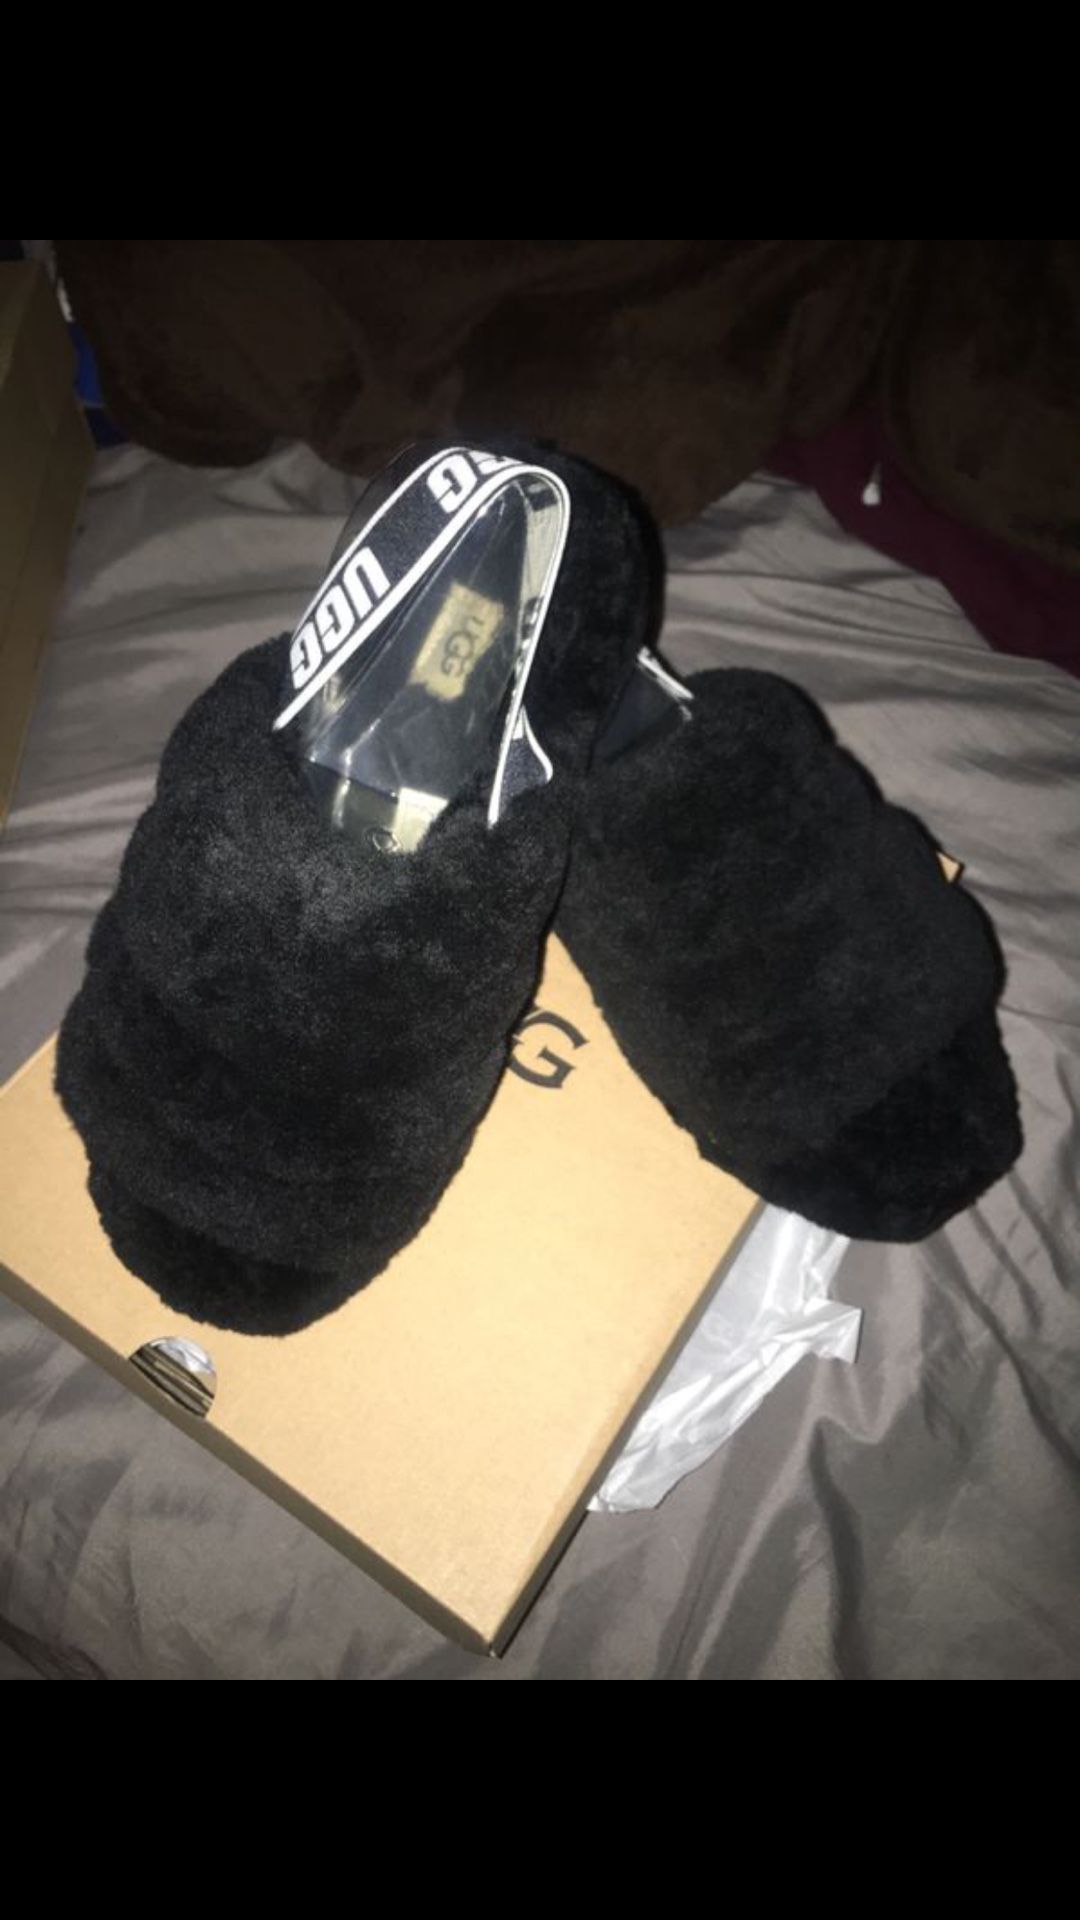 UGG W FLUFF YEAH SLIDE SIZE 8 COLOR BLACK BRAND NEW !!!!!WITH BOX !!!!!